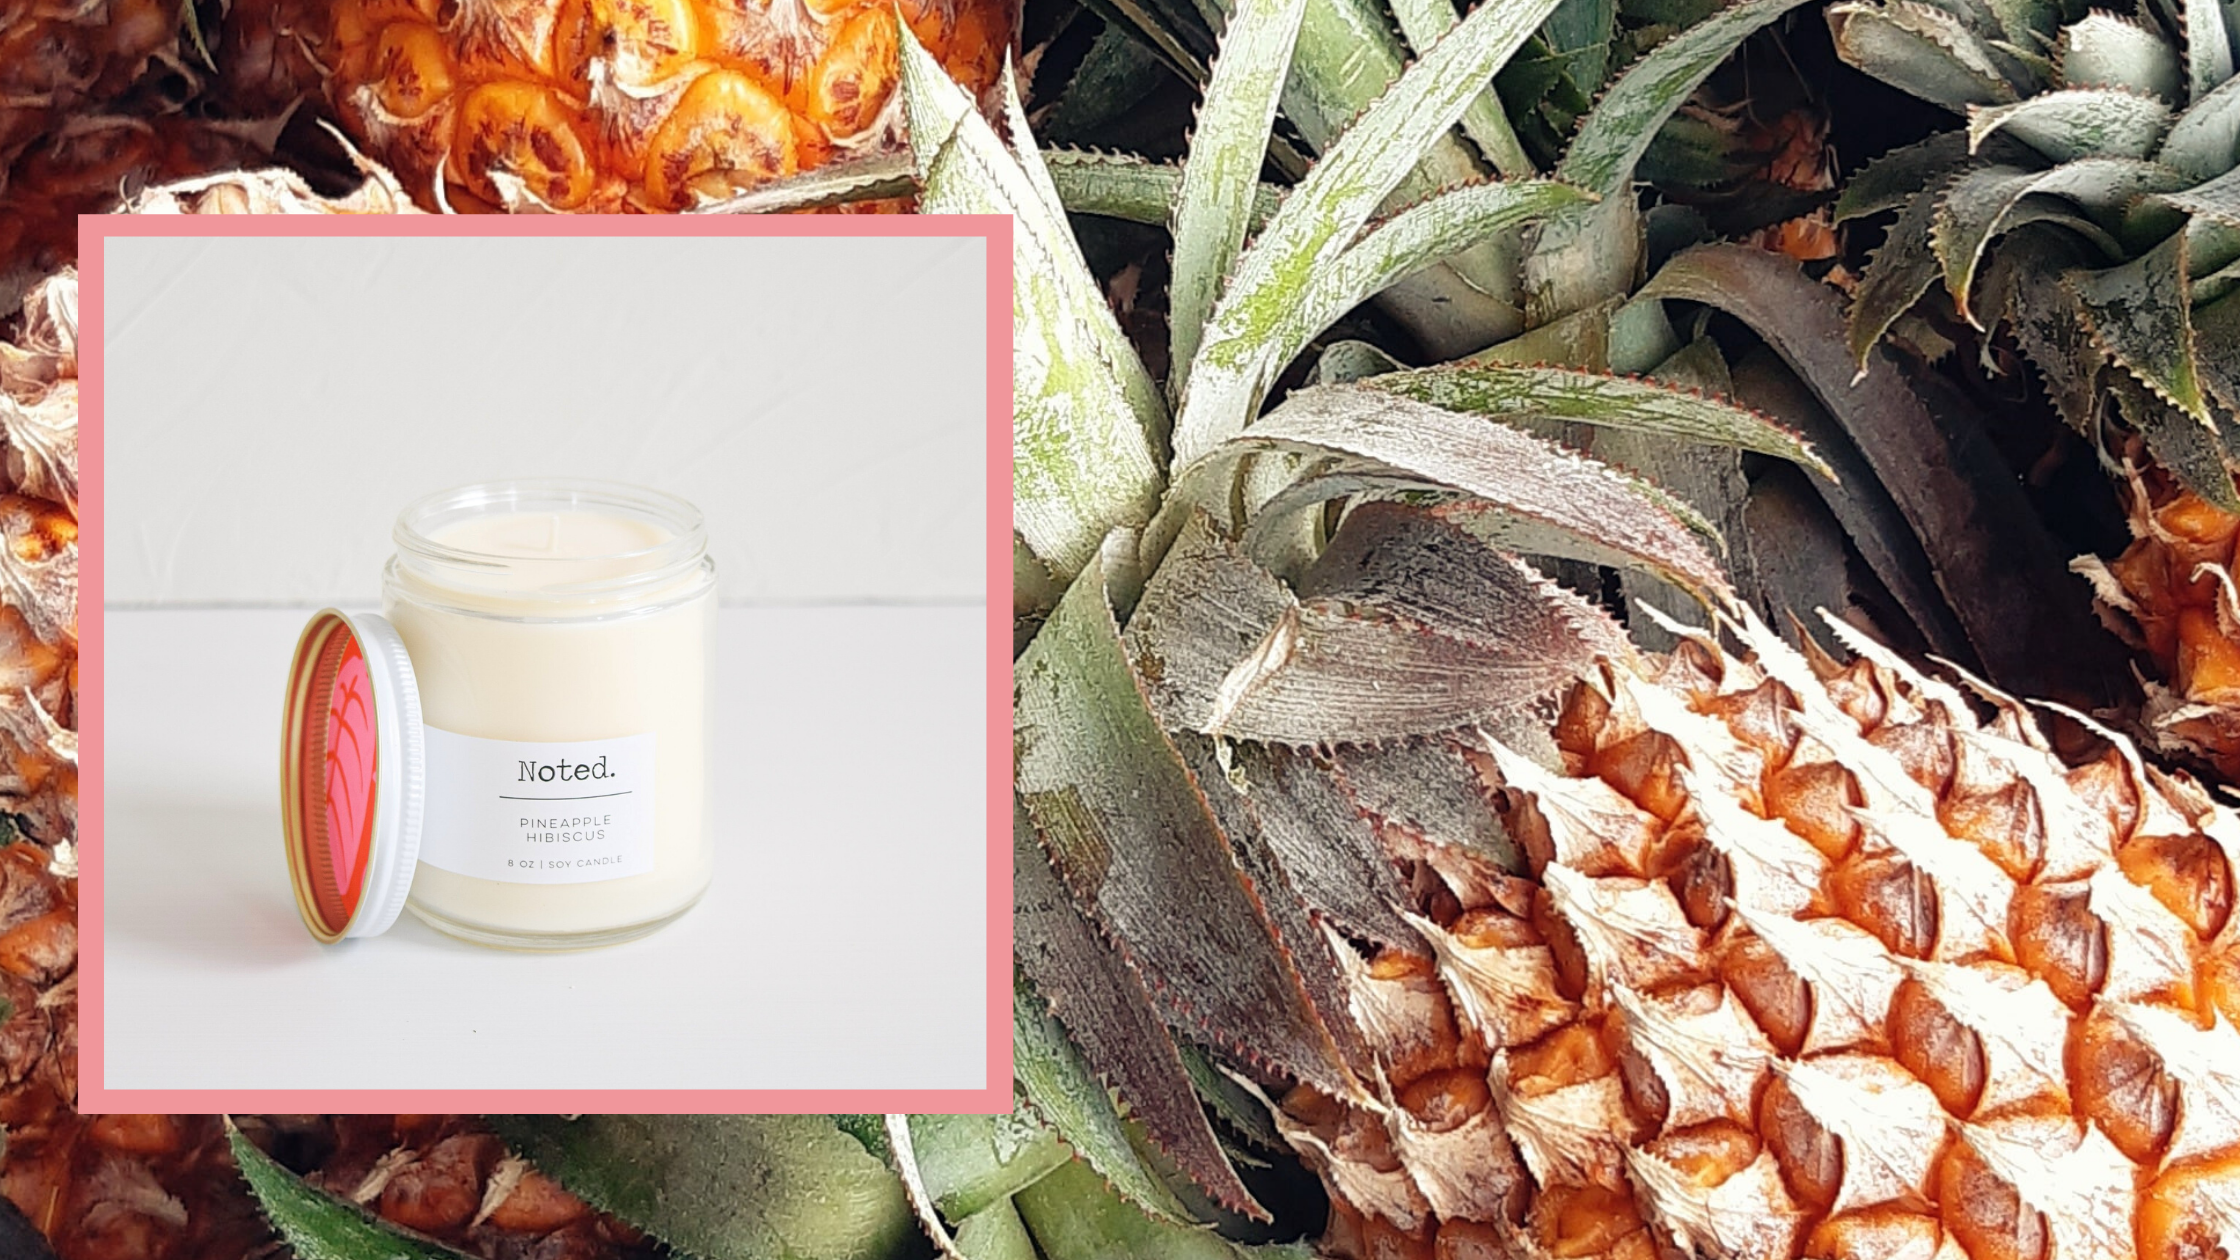 Get To Know Pineapple Hibiscus | Noted Candles